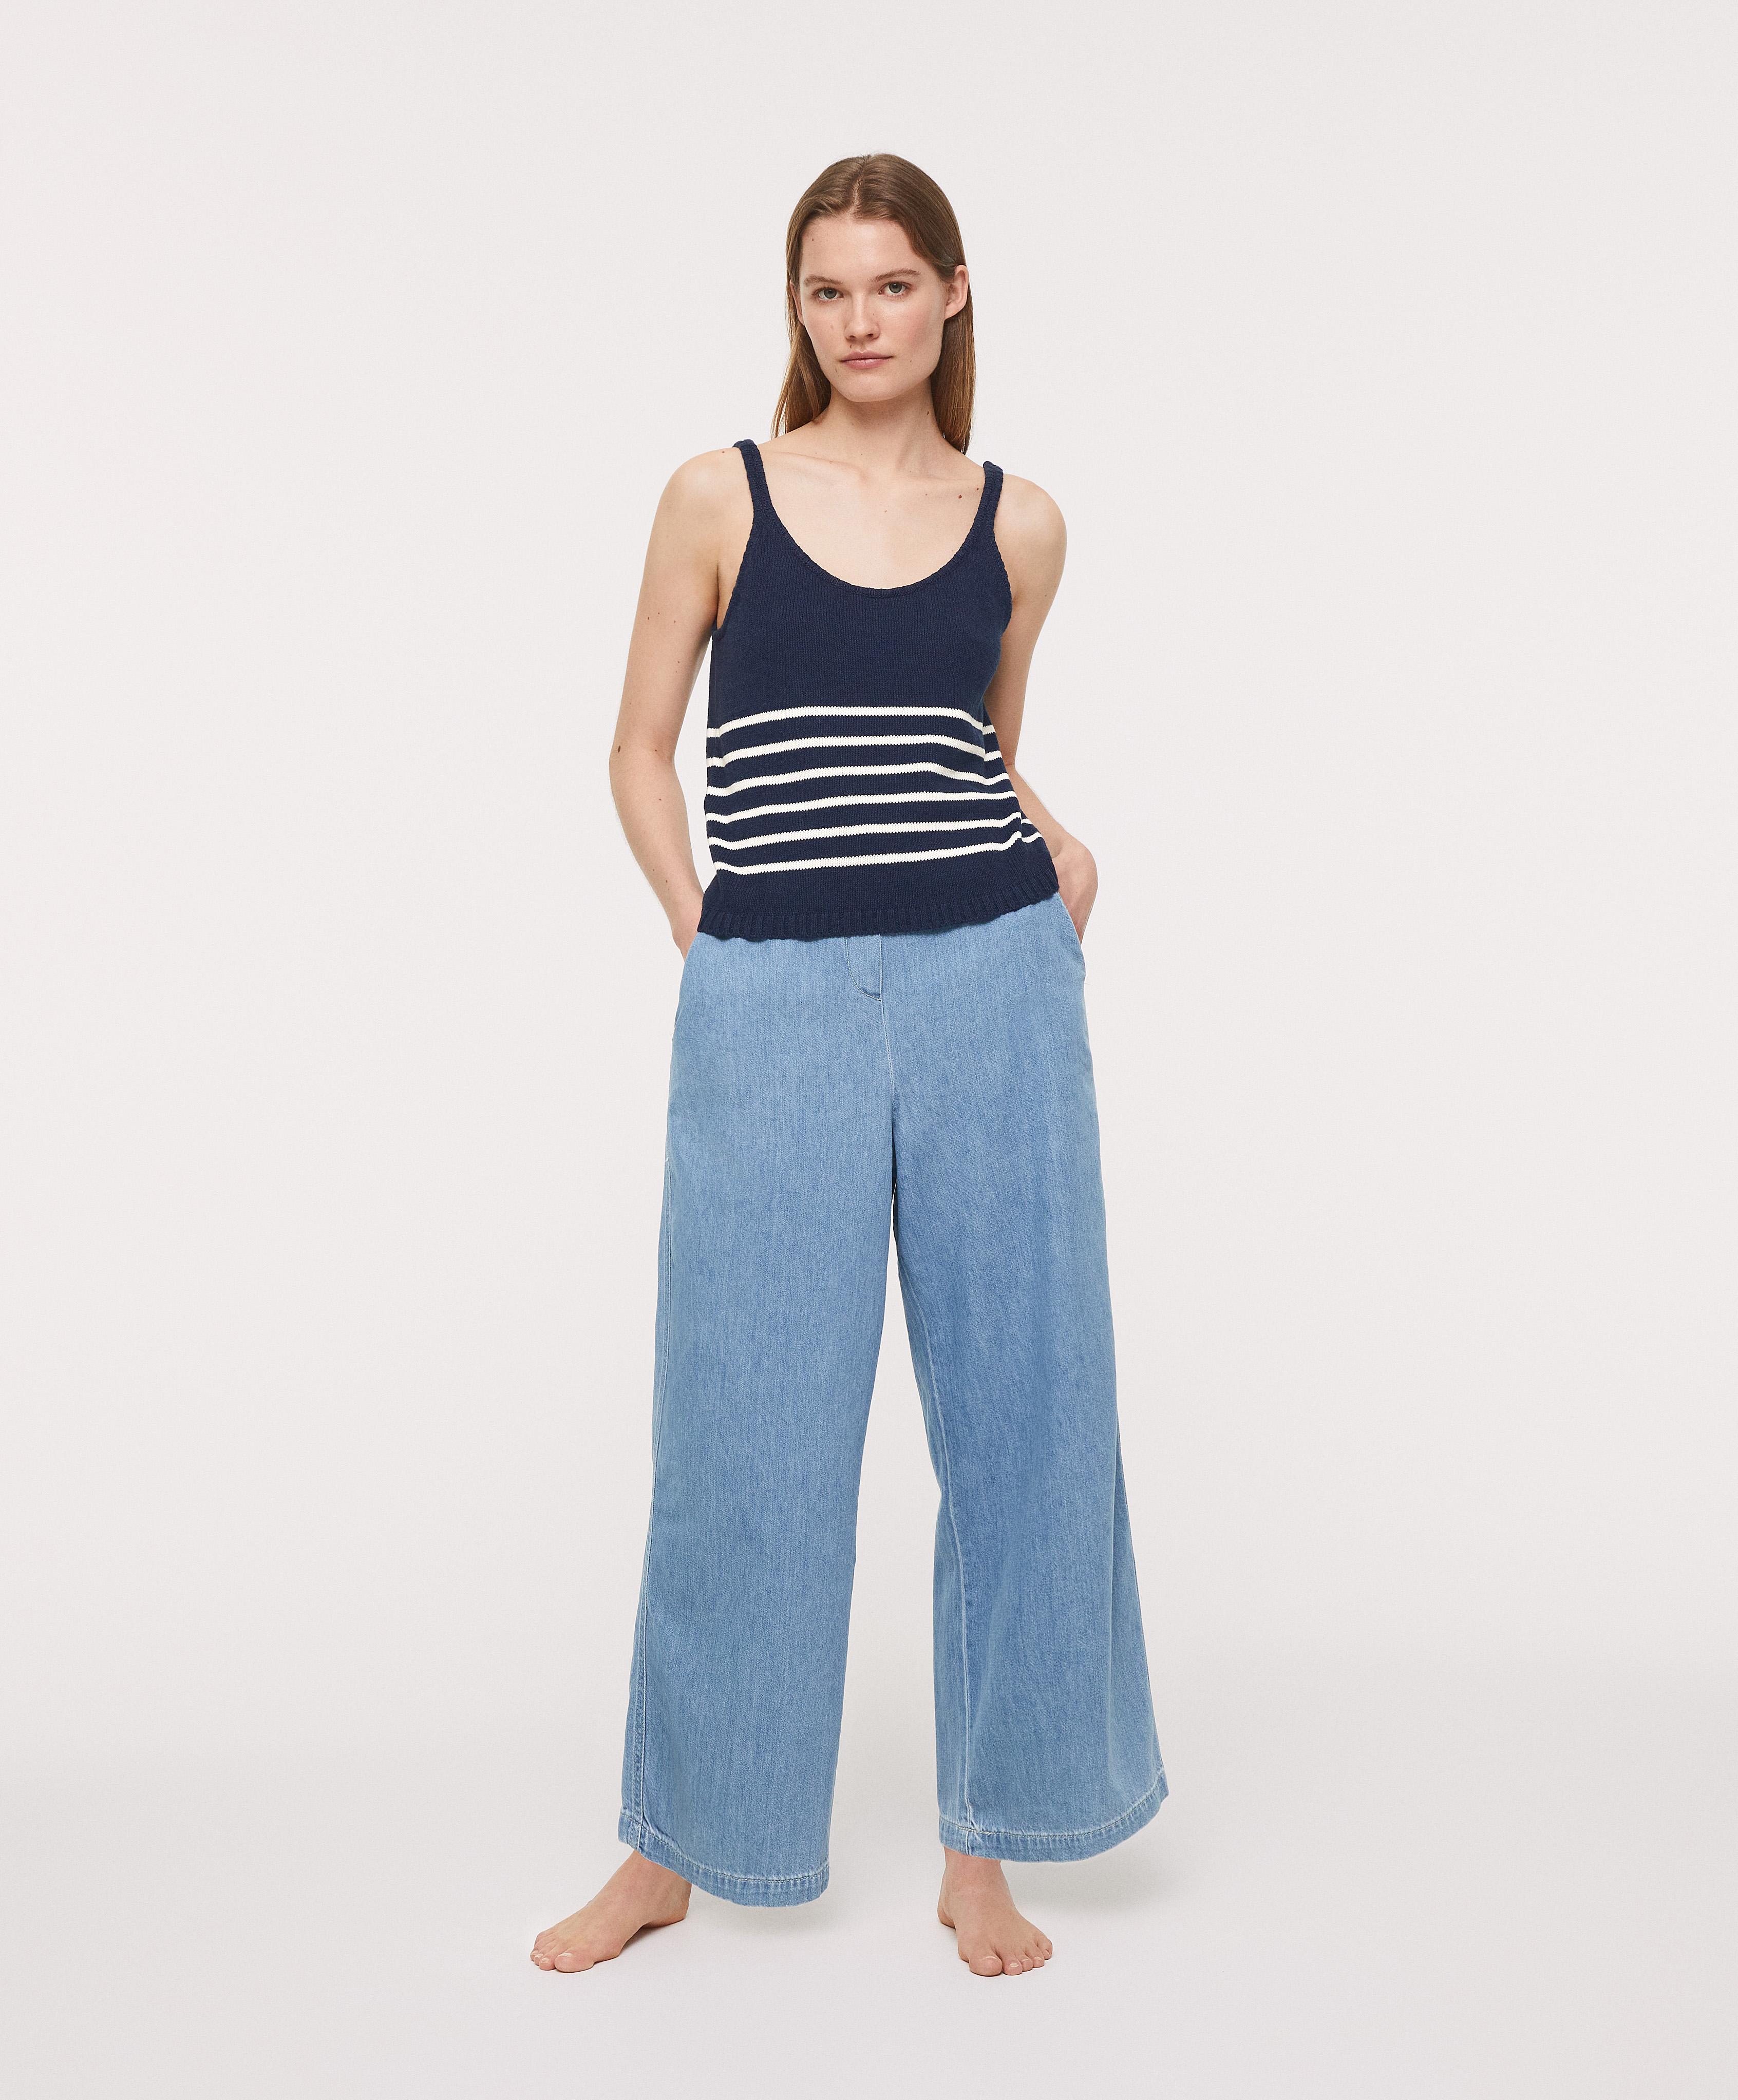 Knit cotton and linen vest top with stripe pattern